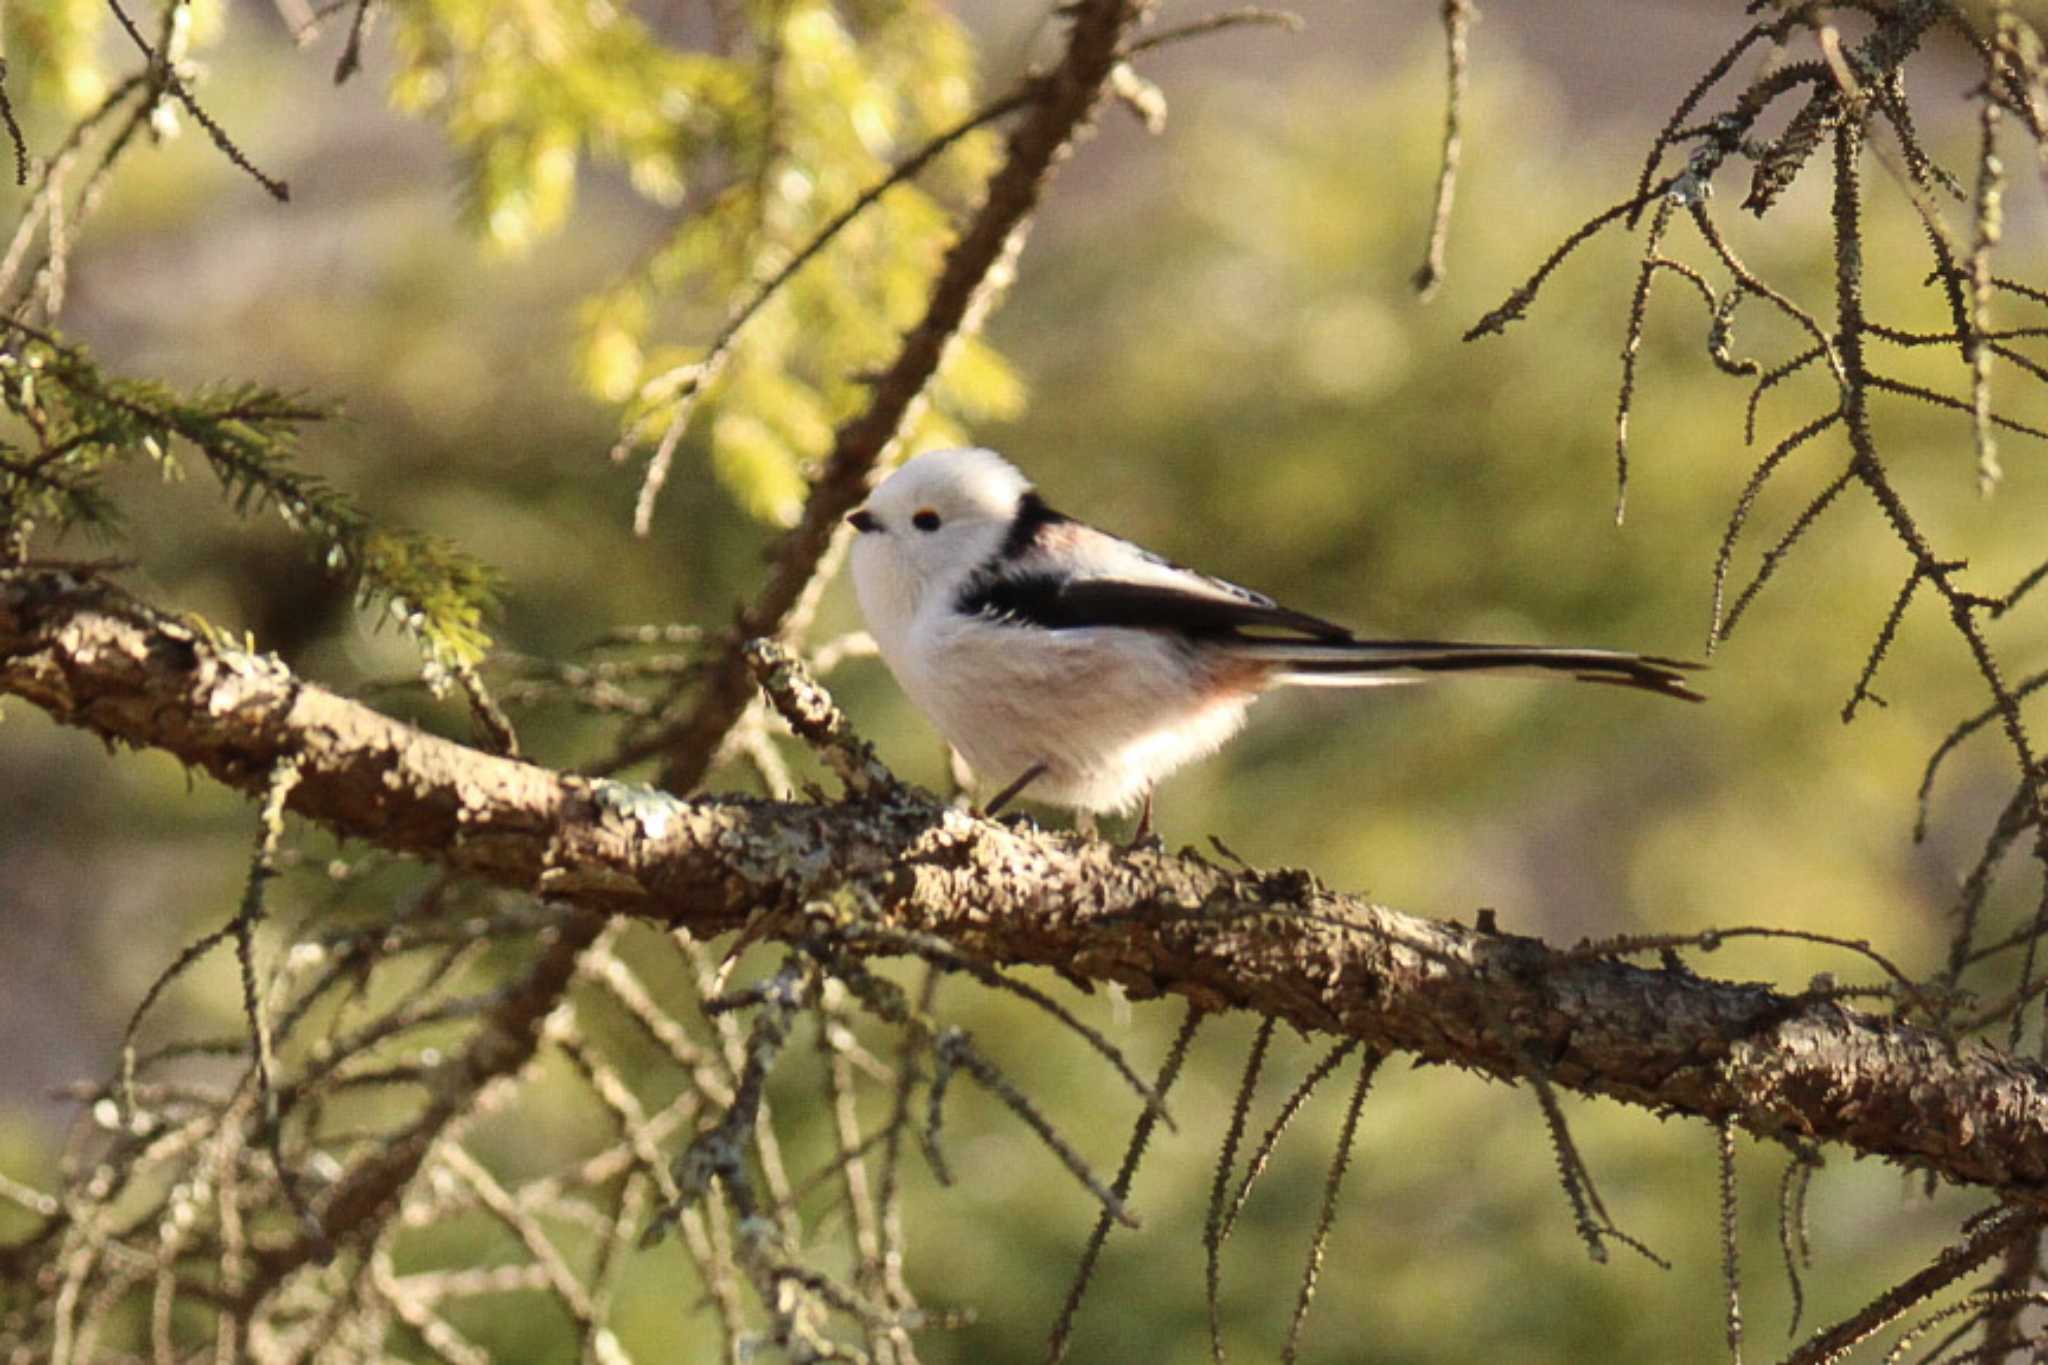 Photo of Long-tailed tit(japonicus) at 十勝地方 本別公園 by ノビタキ王国の住民 